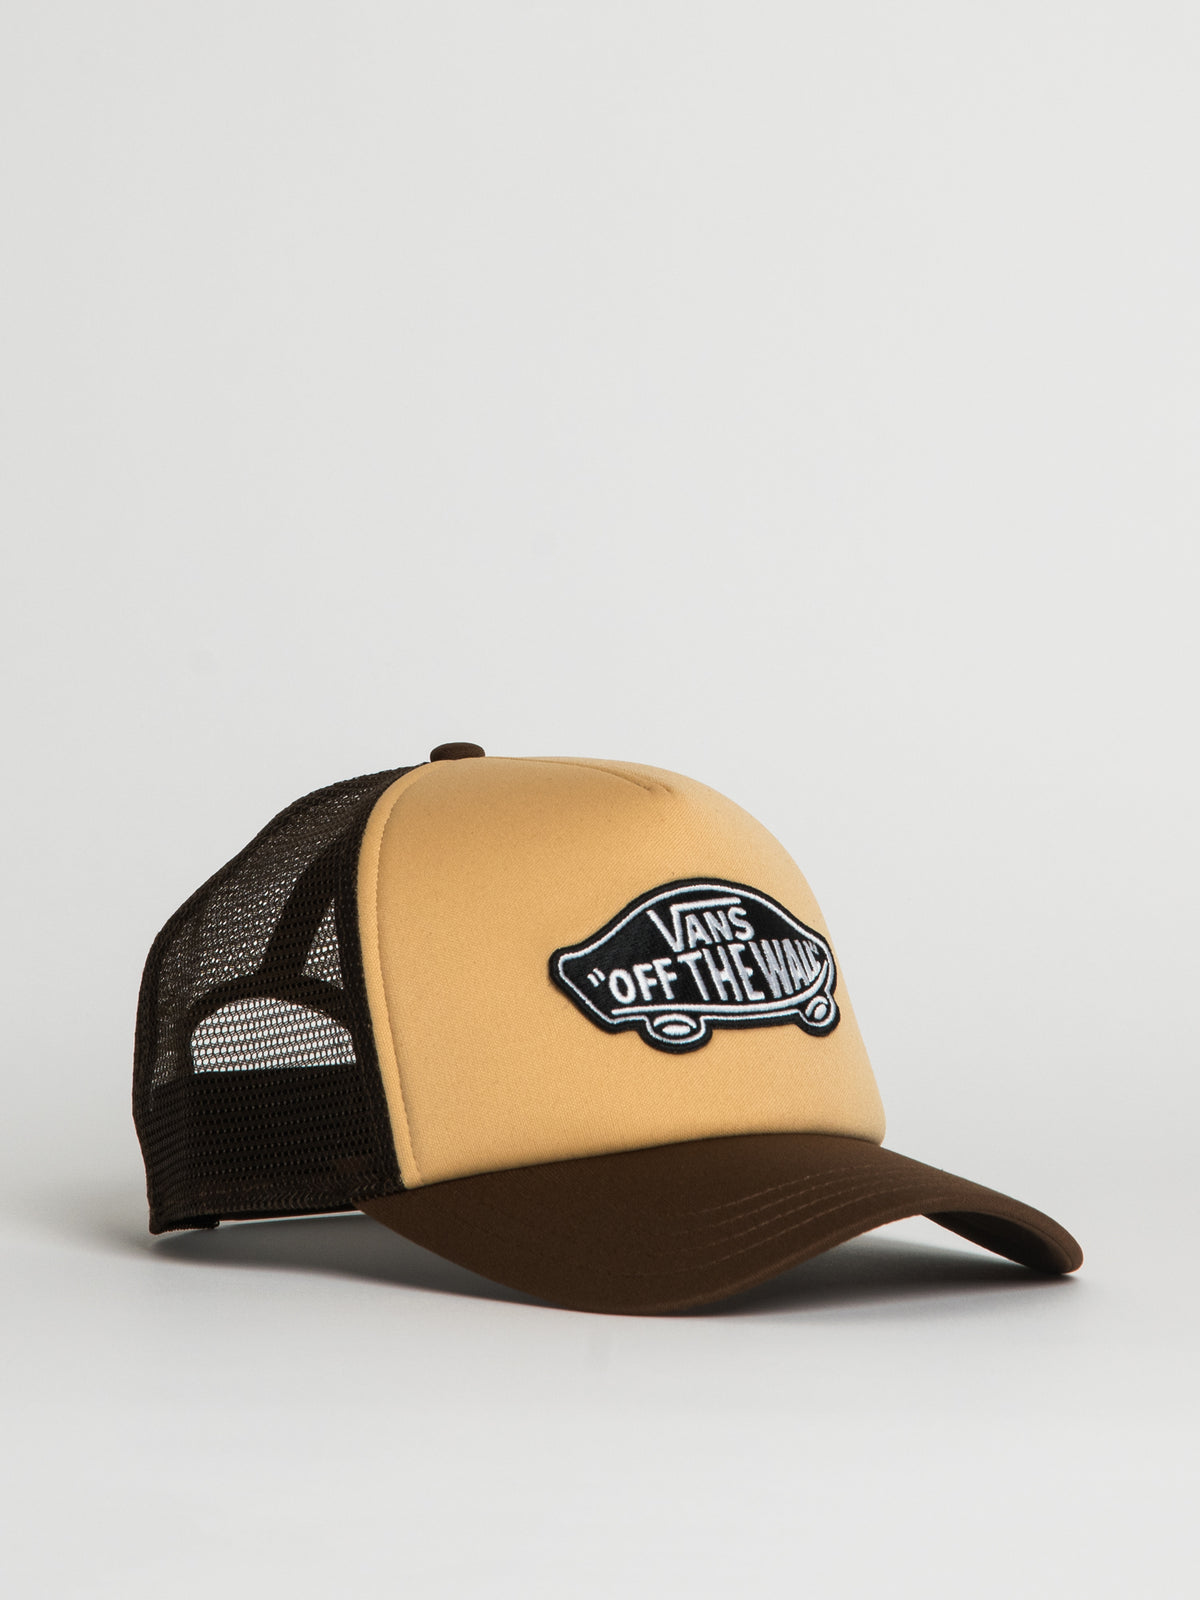 VANS CLASSIC PATCH CURVED BILL HAT | TRUCKER Footwear Boathouse Collective